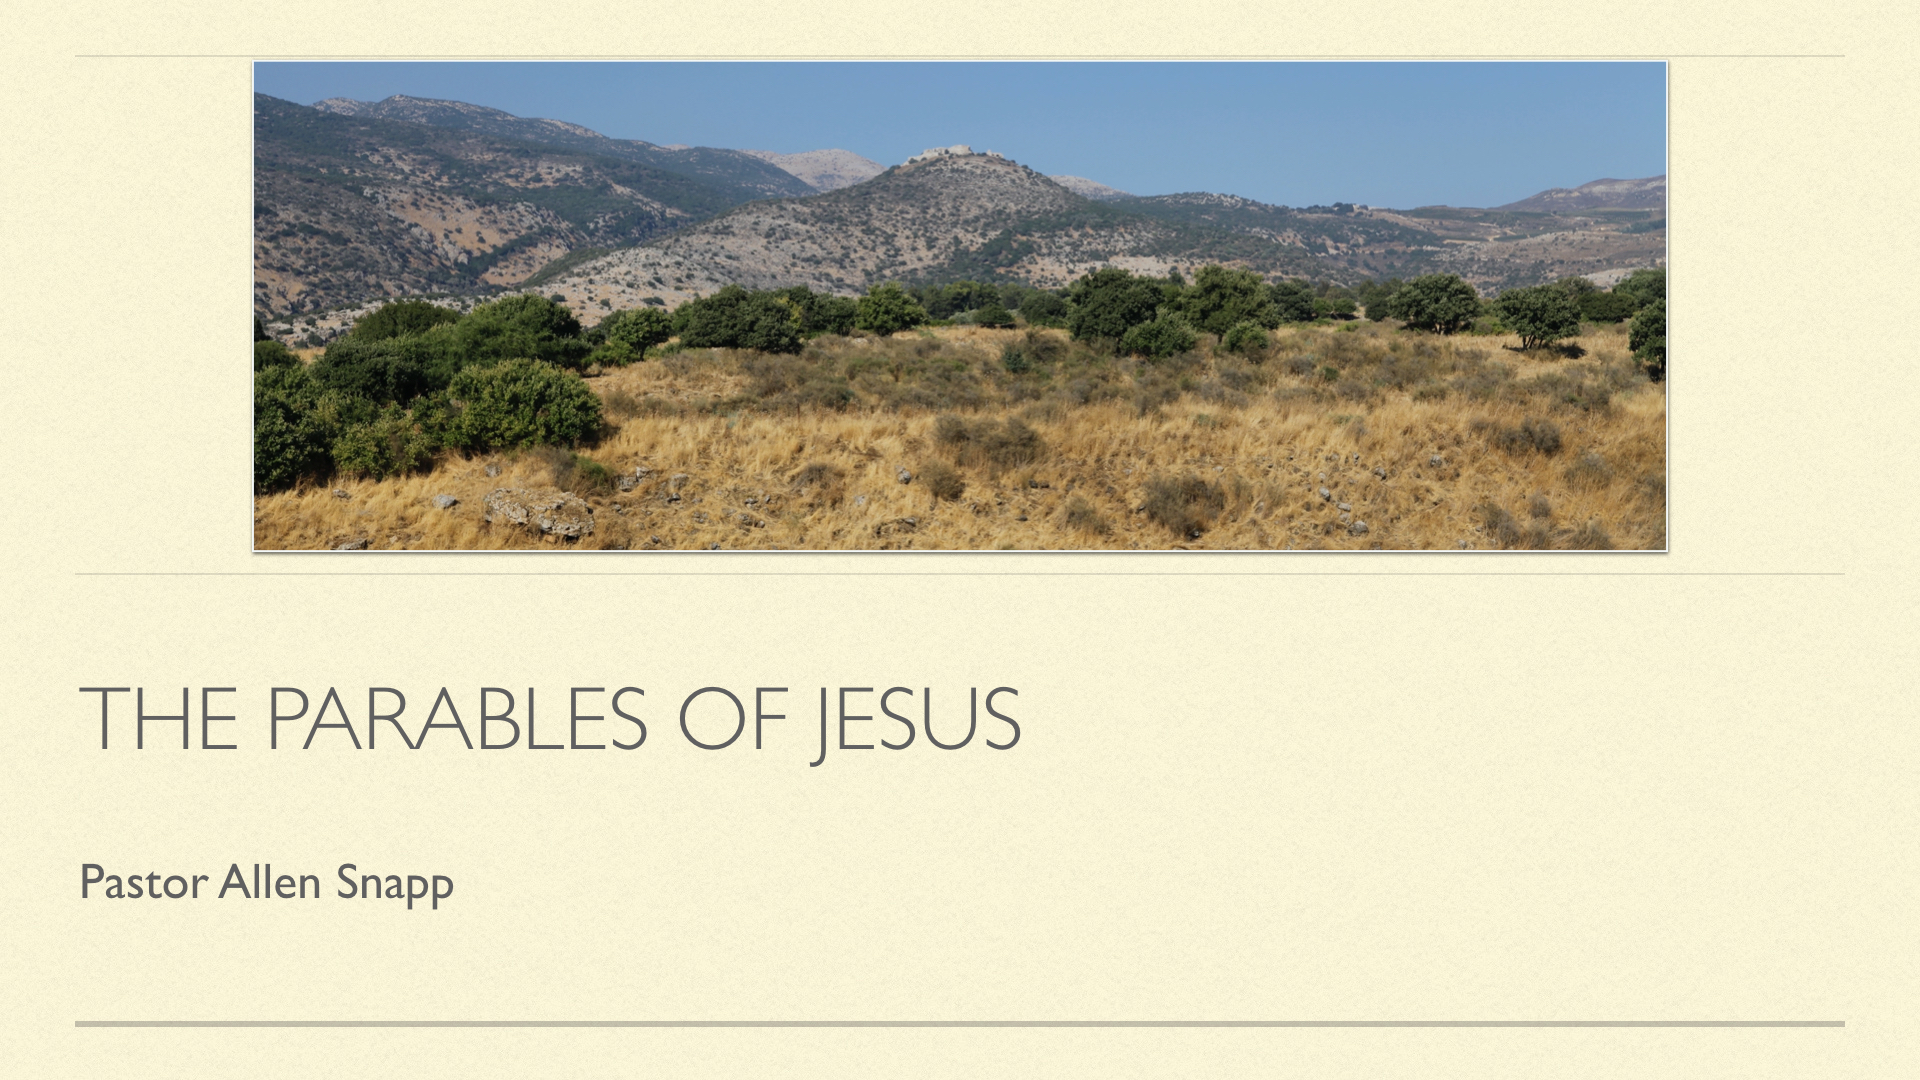 The Parables of Jesus banner